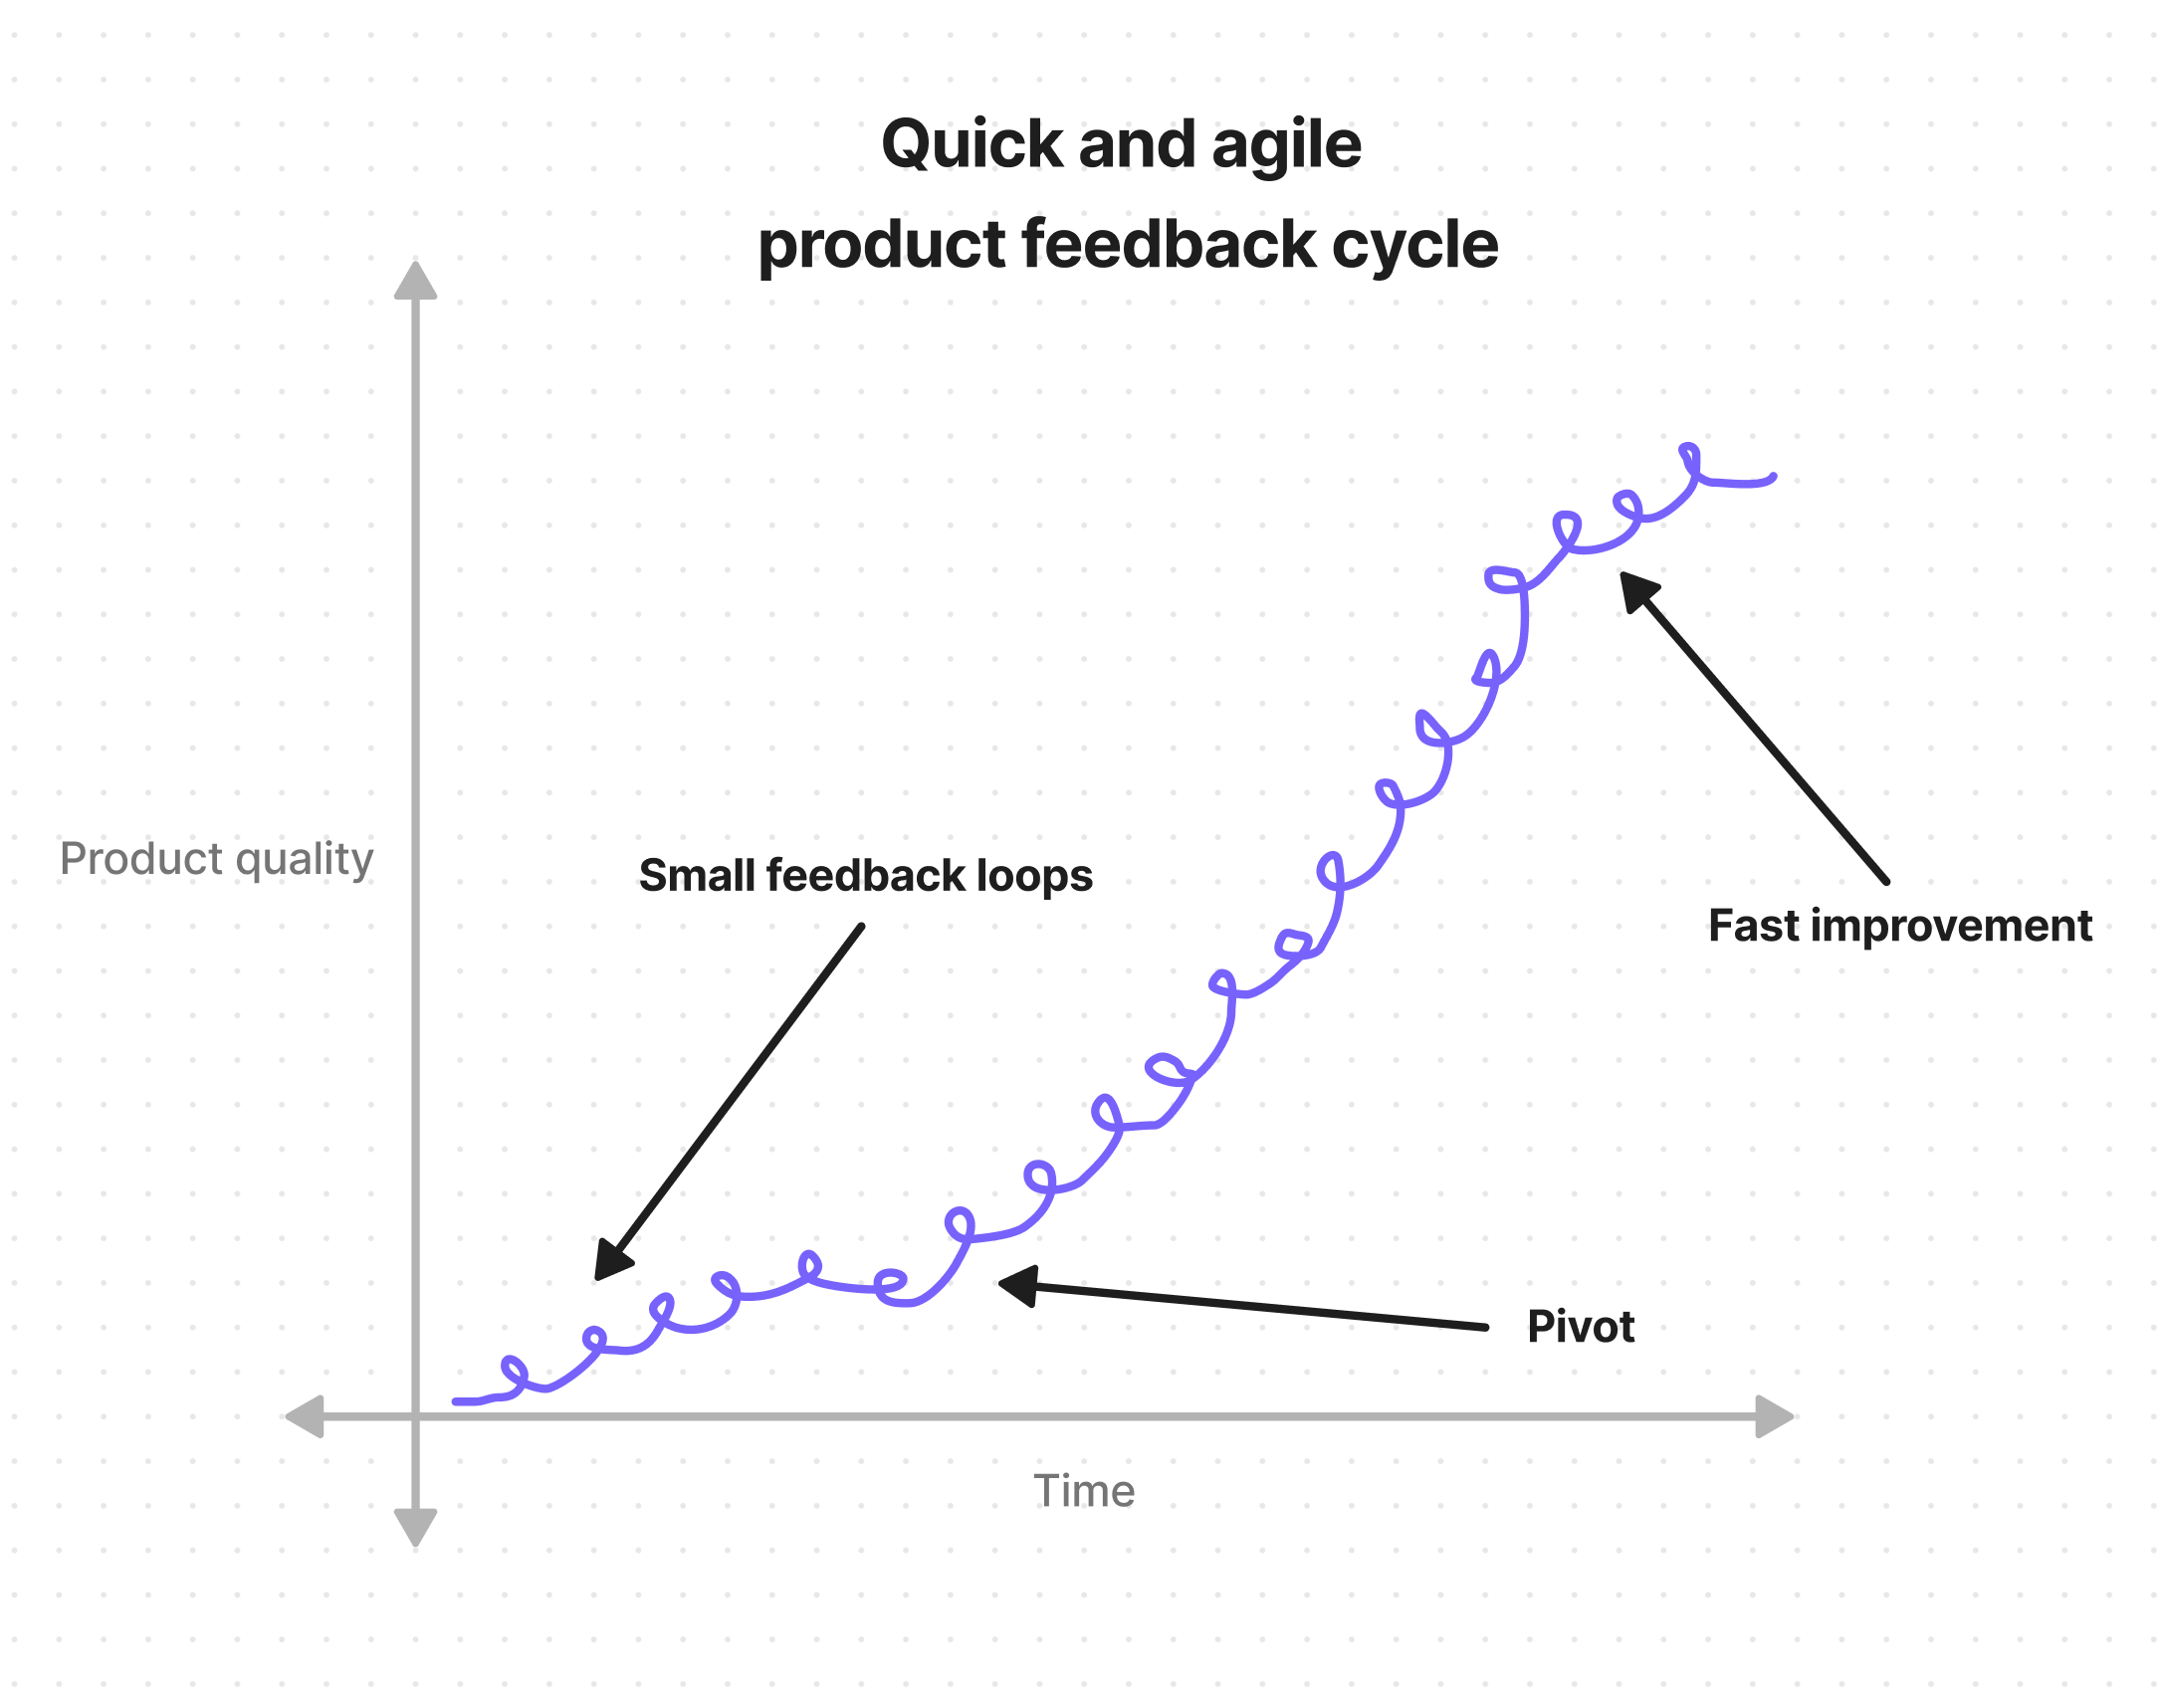 Quick and agile feedback cycles